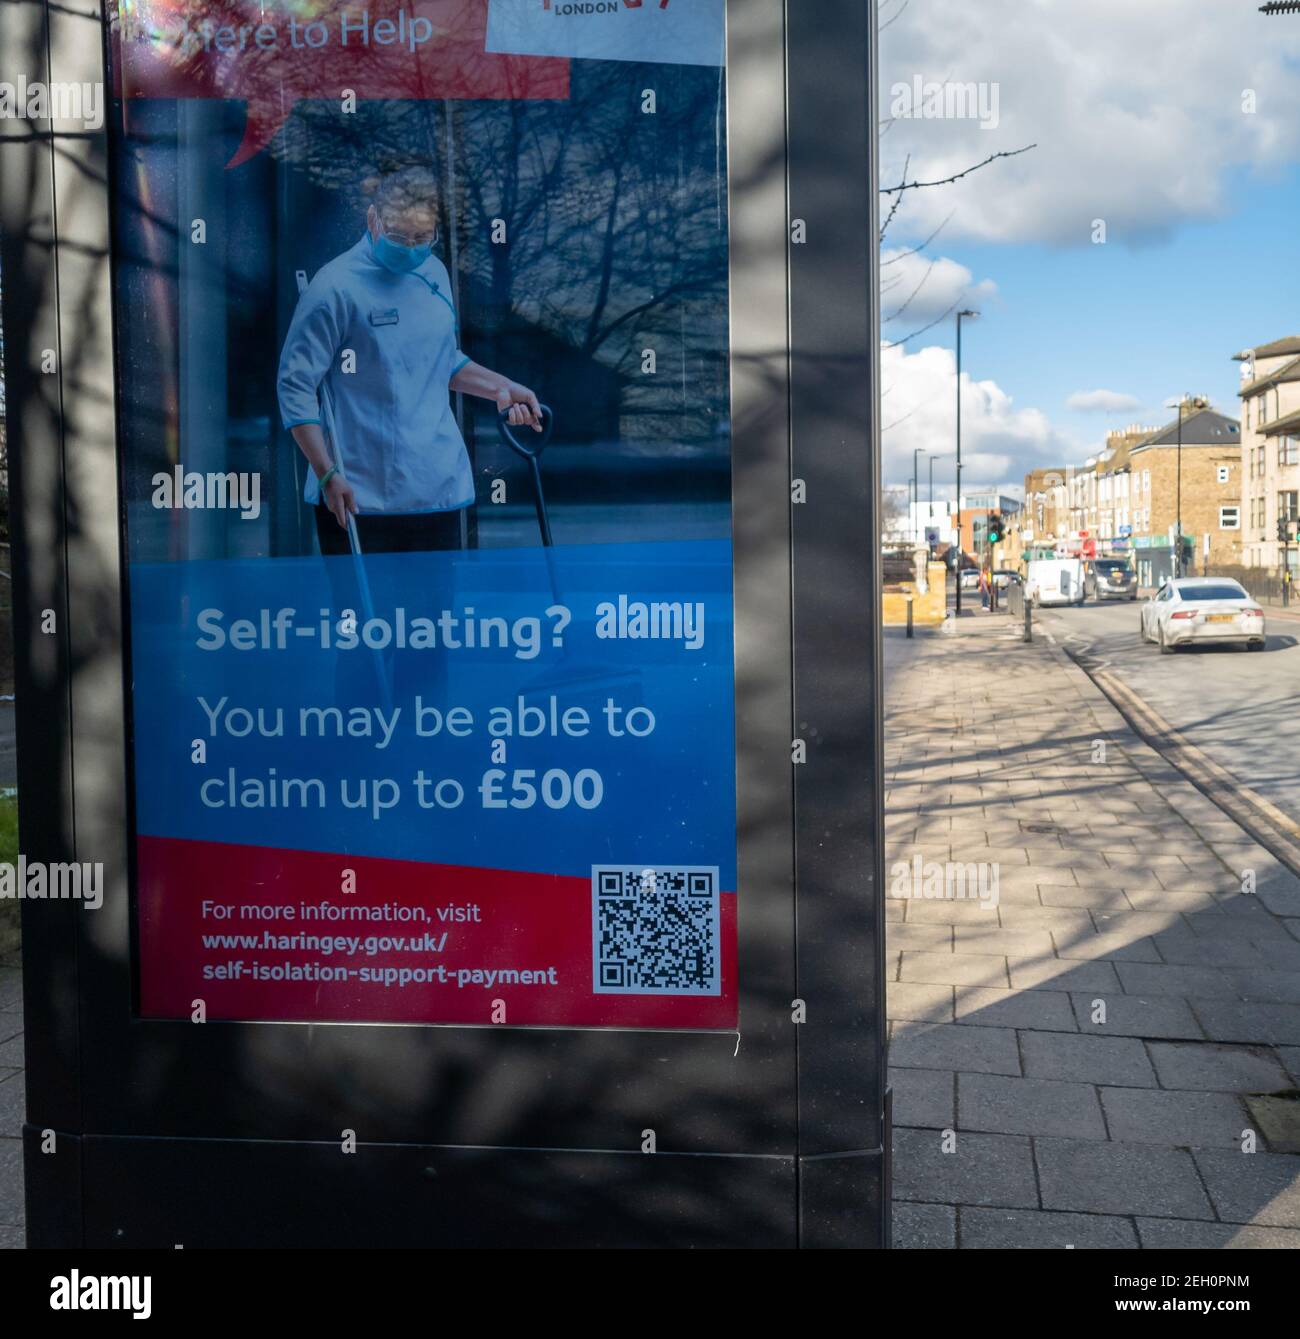 A government Covid-19 information billboard on the street offering financial help for people self isolating during the national lockdown. Stock Photo